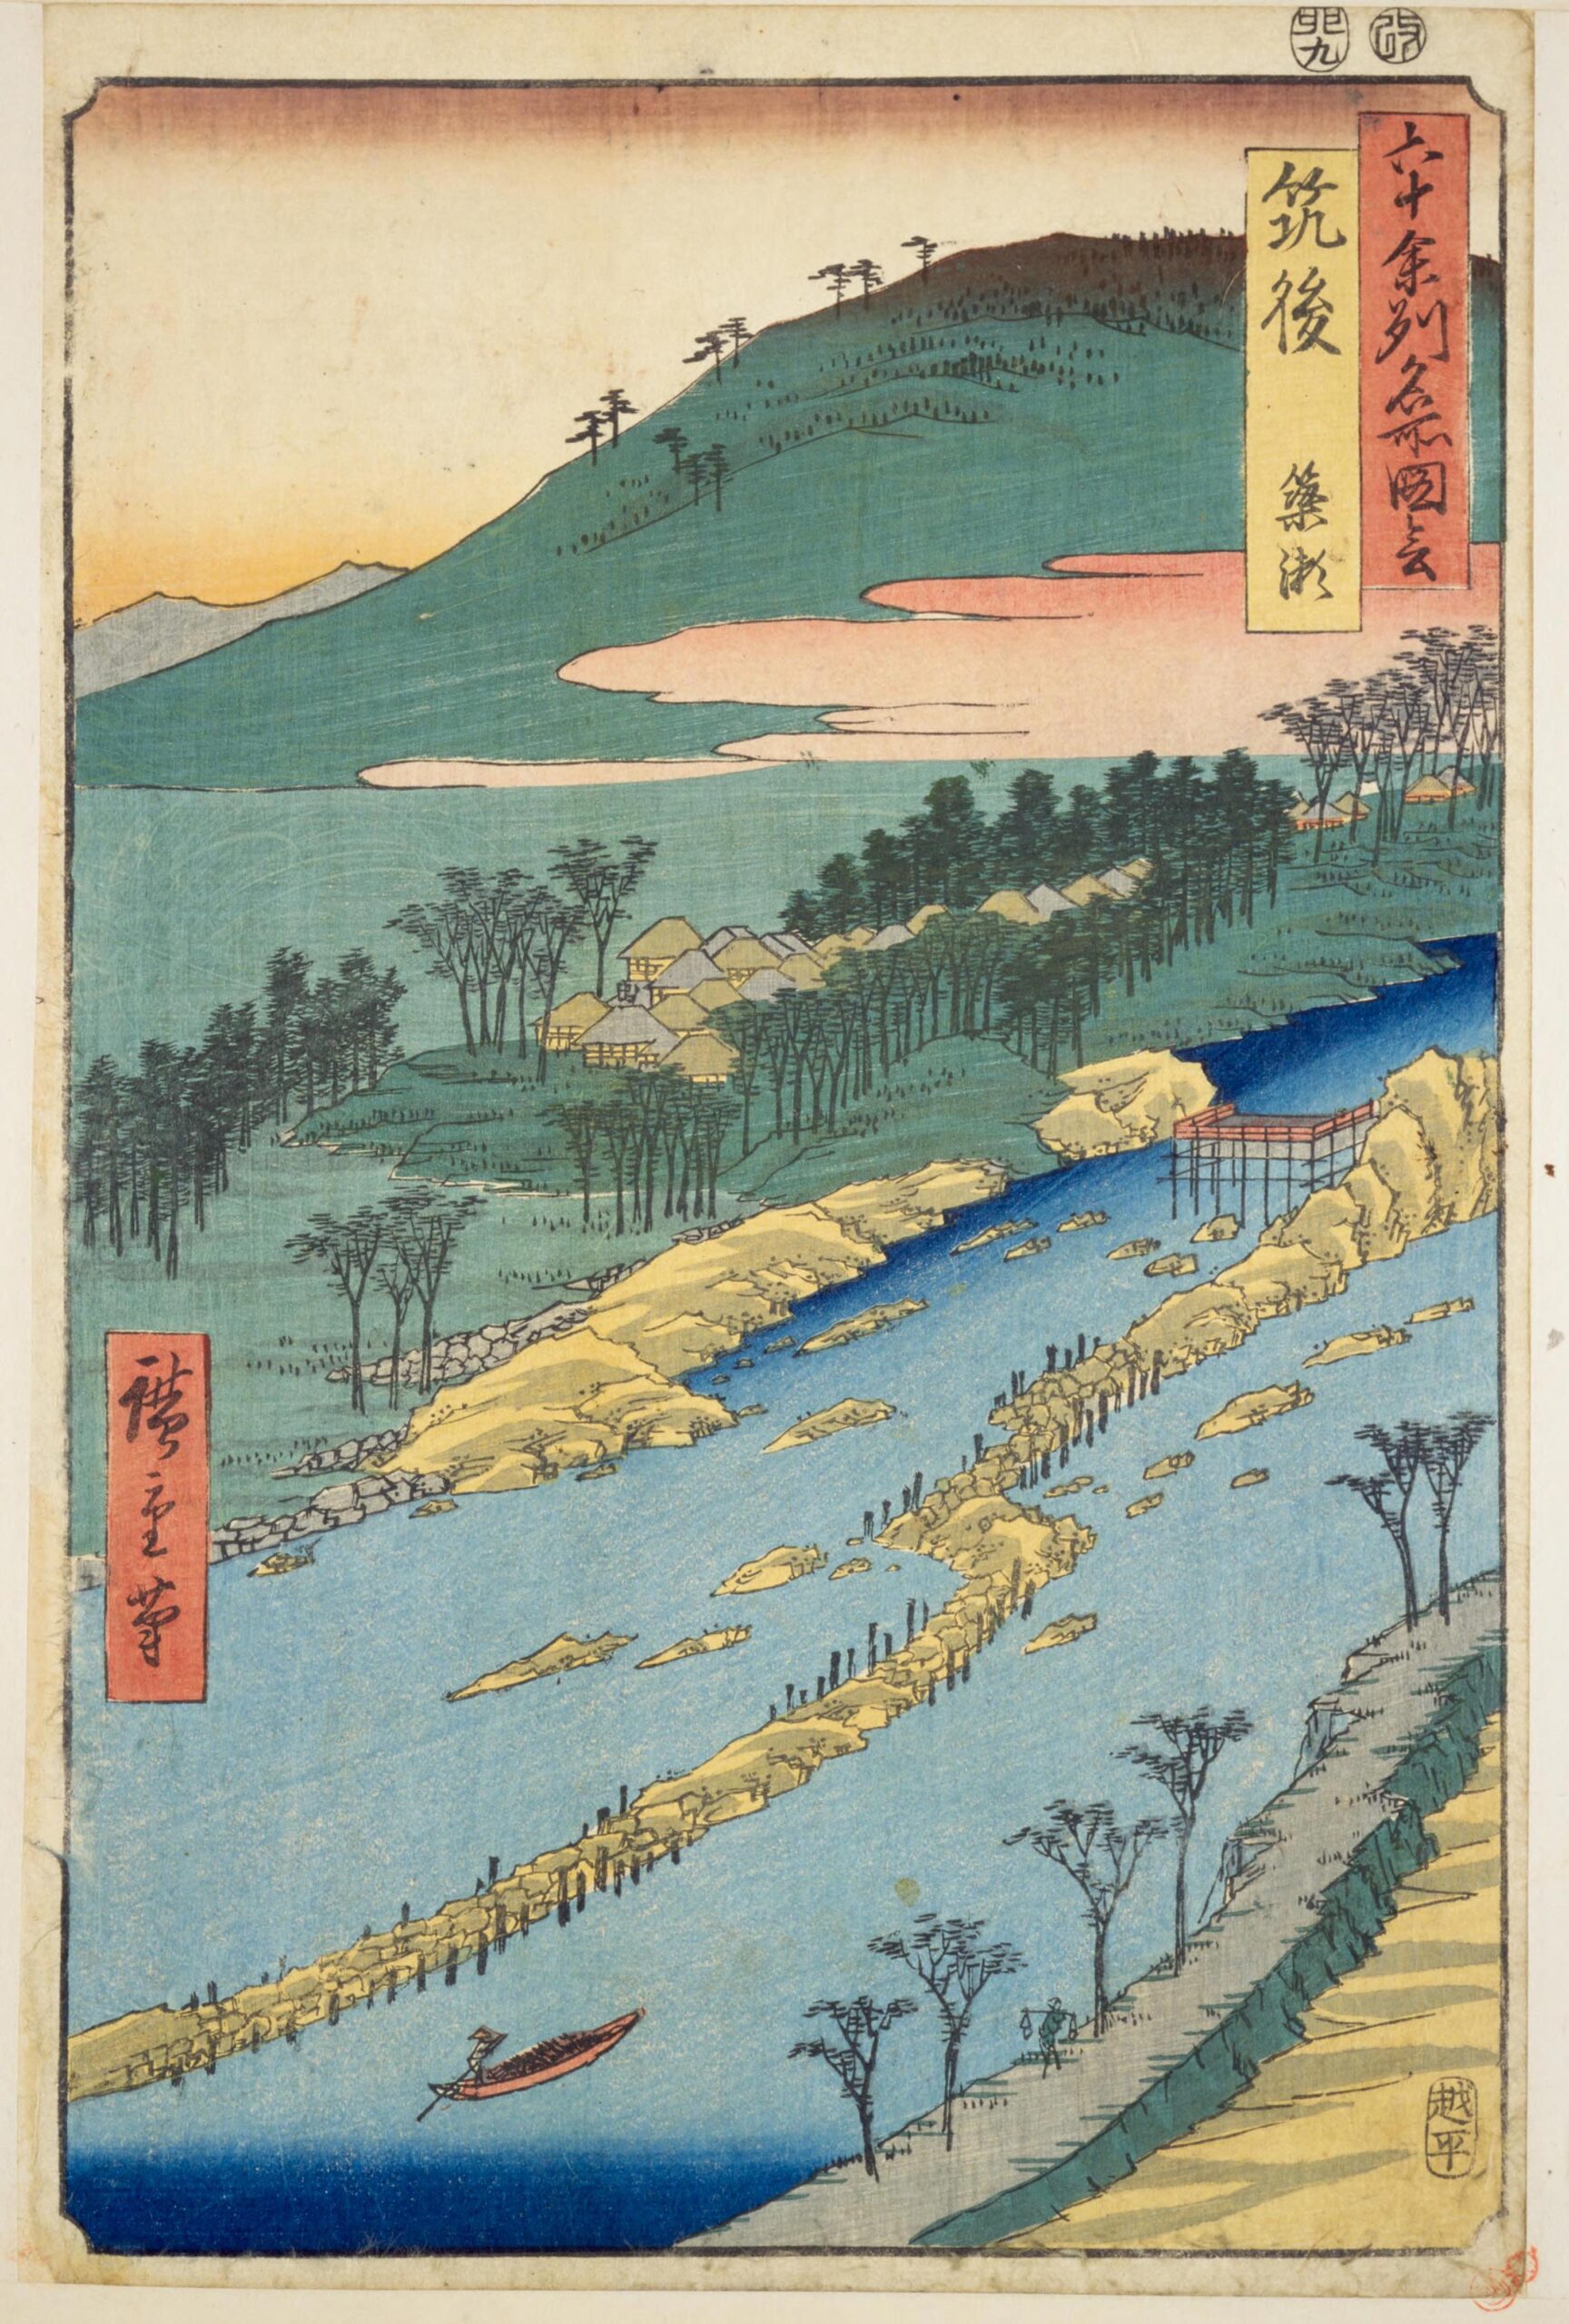 Hiroshiges - 60 Chikugo Province: The Currents Around the Weir (Chikugo, Yanase) - Pictures of Famous Places in the Sixty-odd Provinces